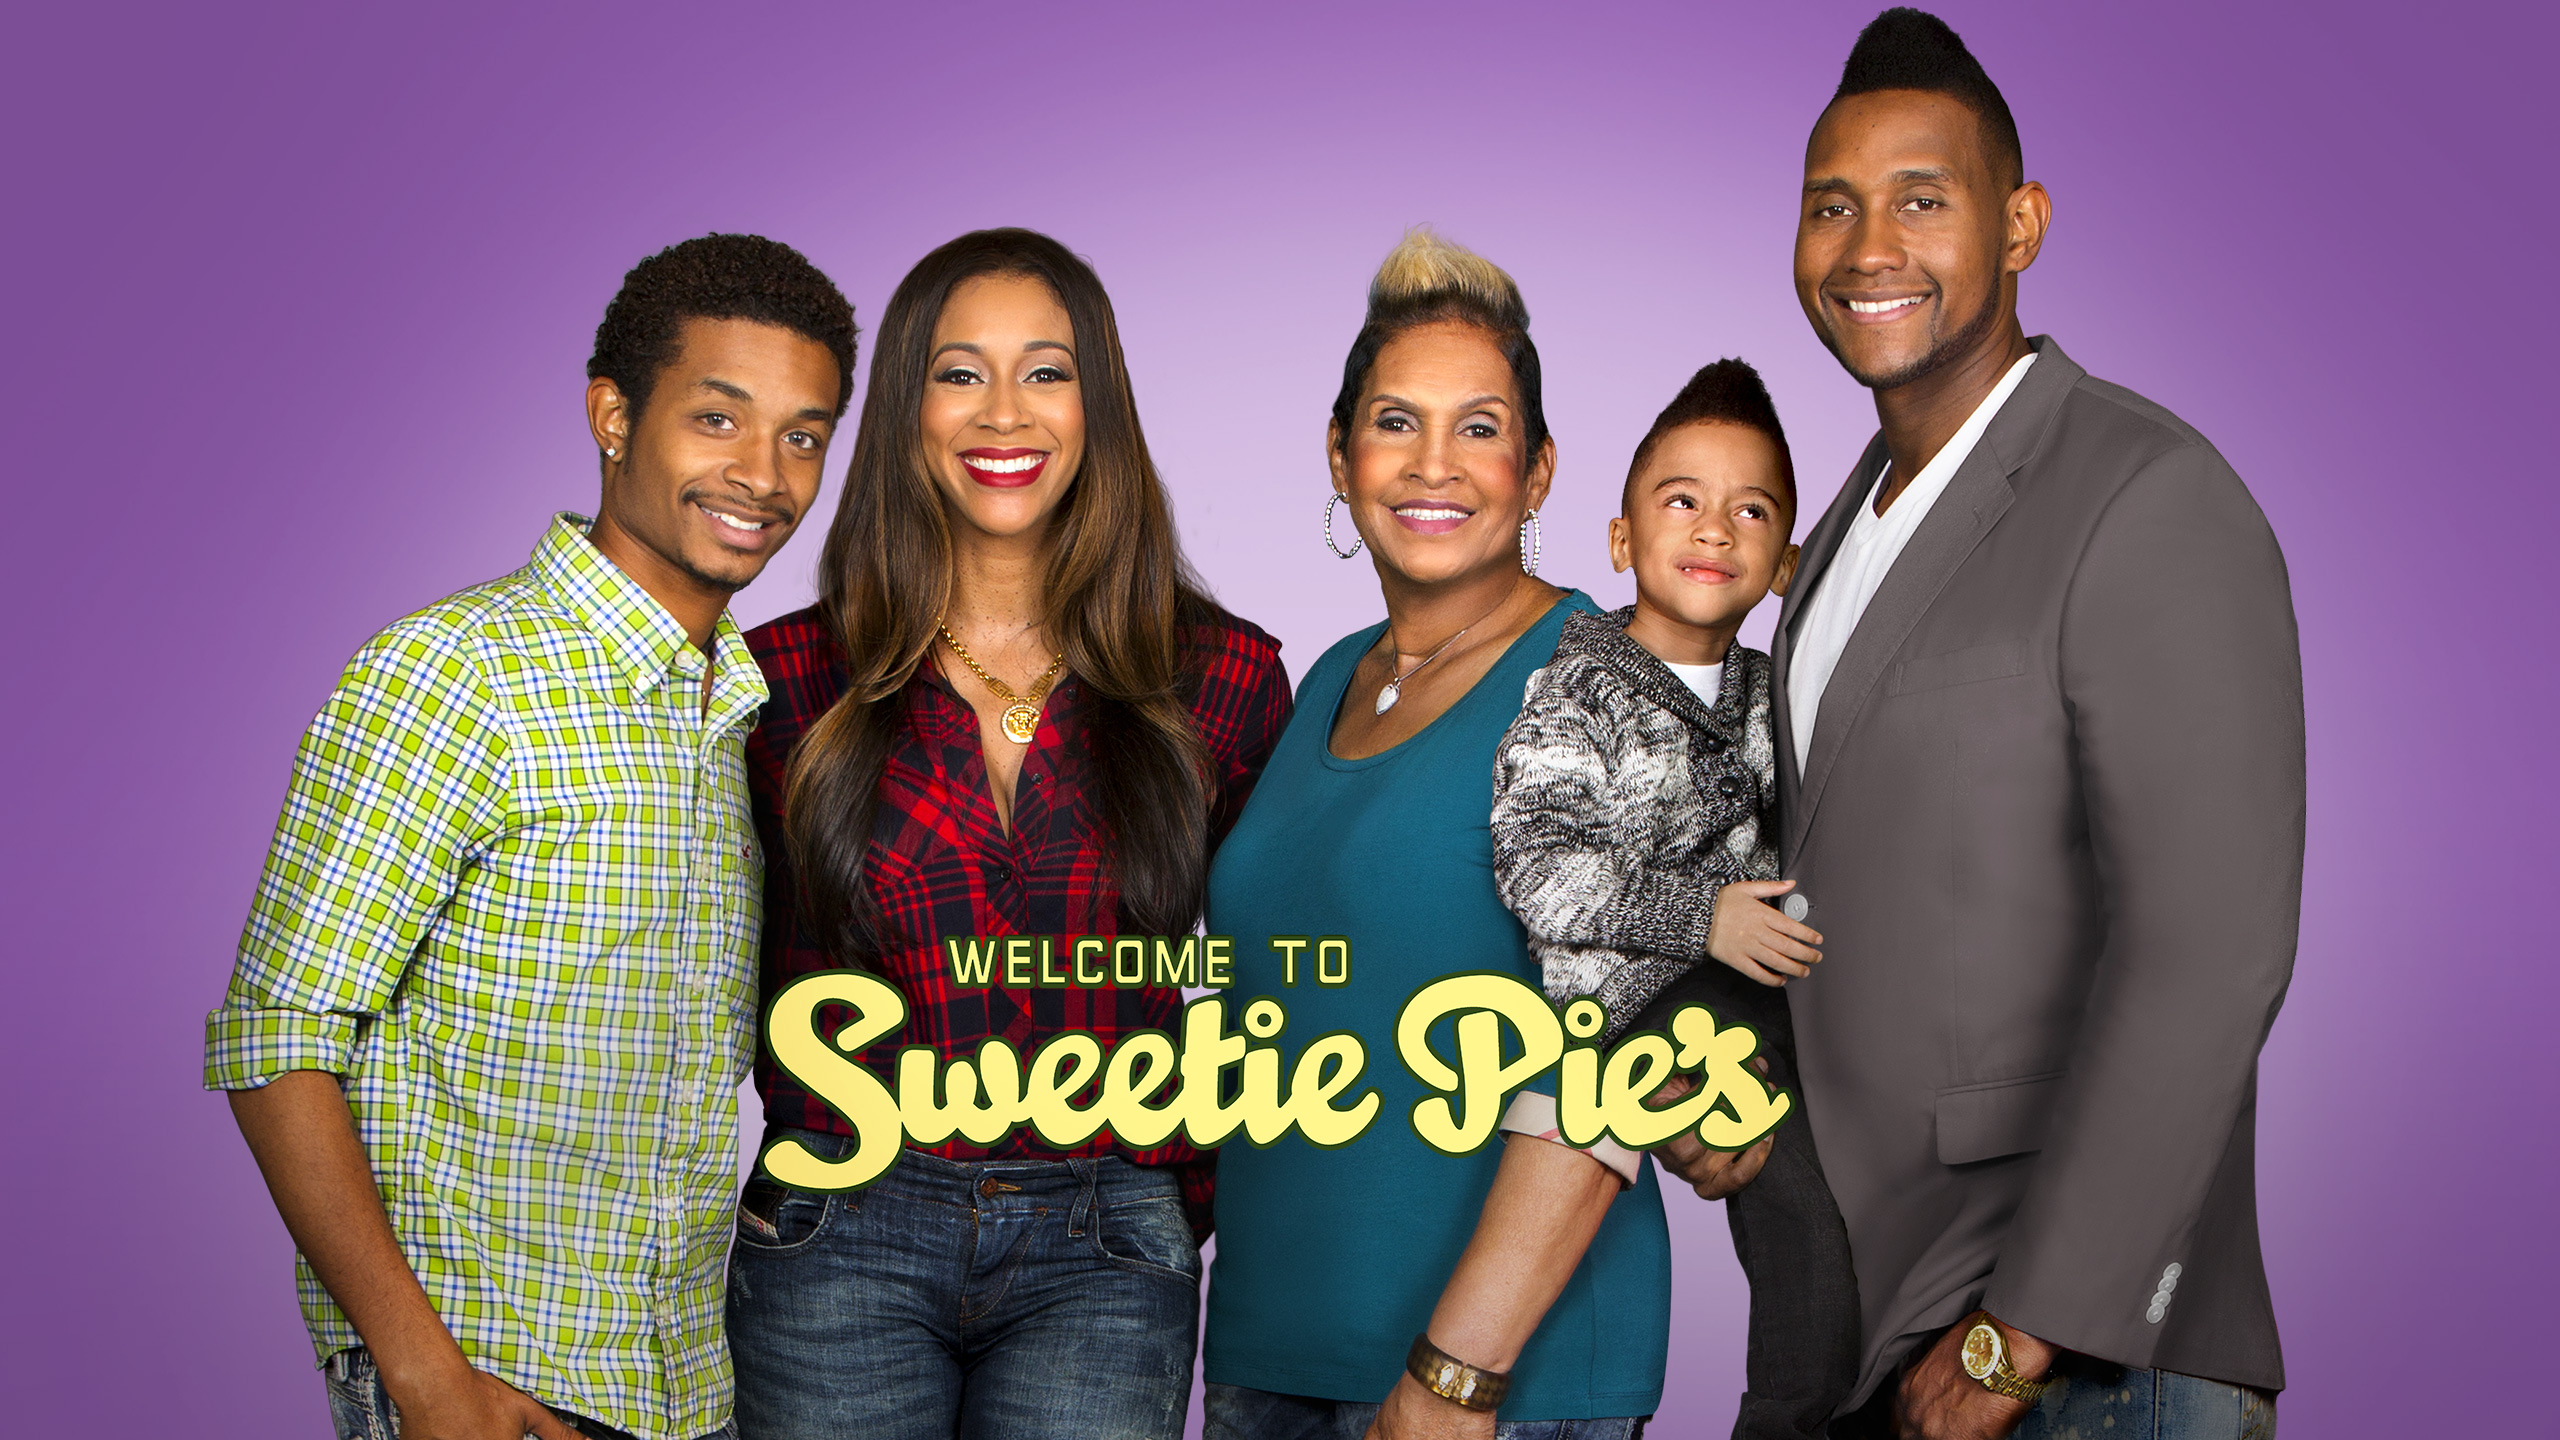 welcome to sweetie pies tim norman net worth